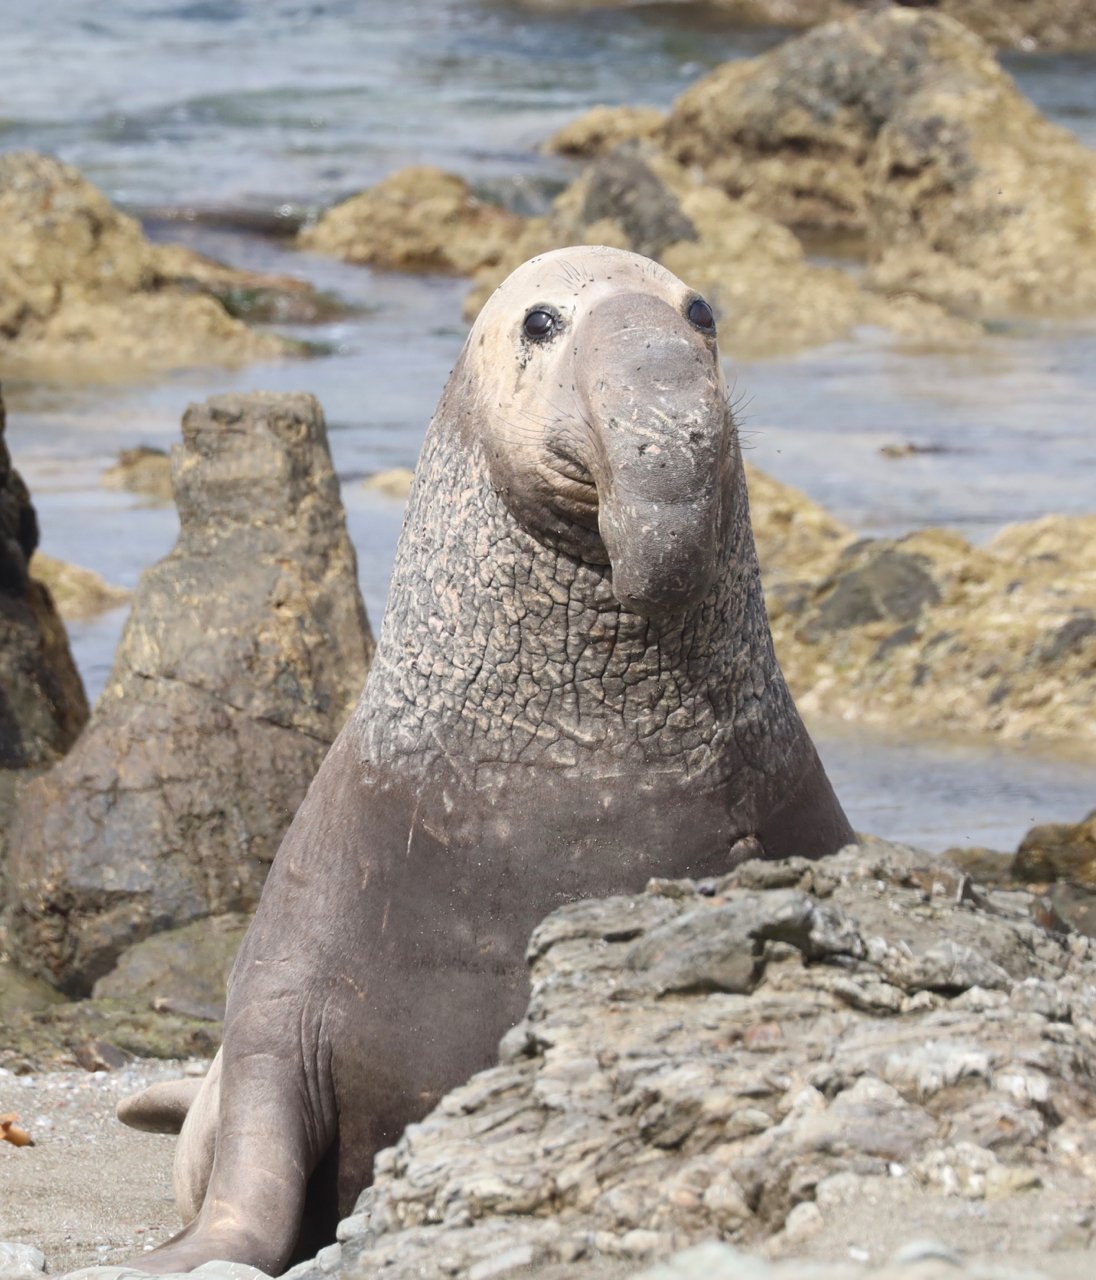 Northern elephant seal at San Benito Islands, photo by Marc Webber